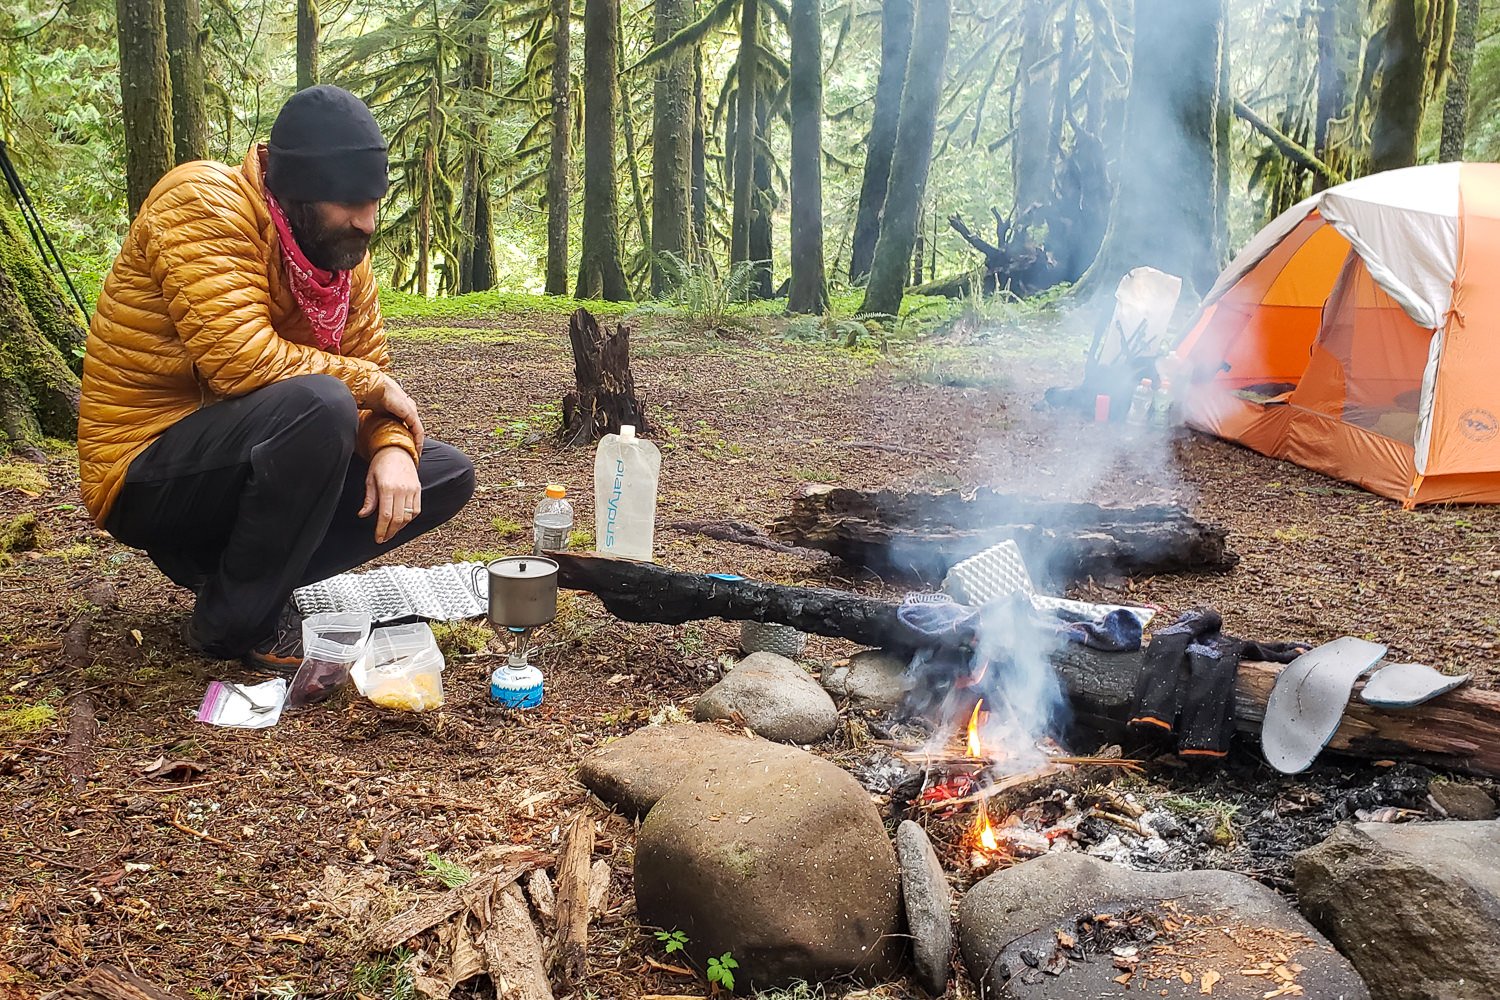 A hiker sitting next to a small fire in a fire ring at a campsite